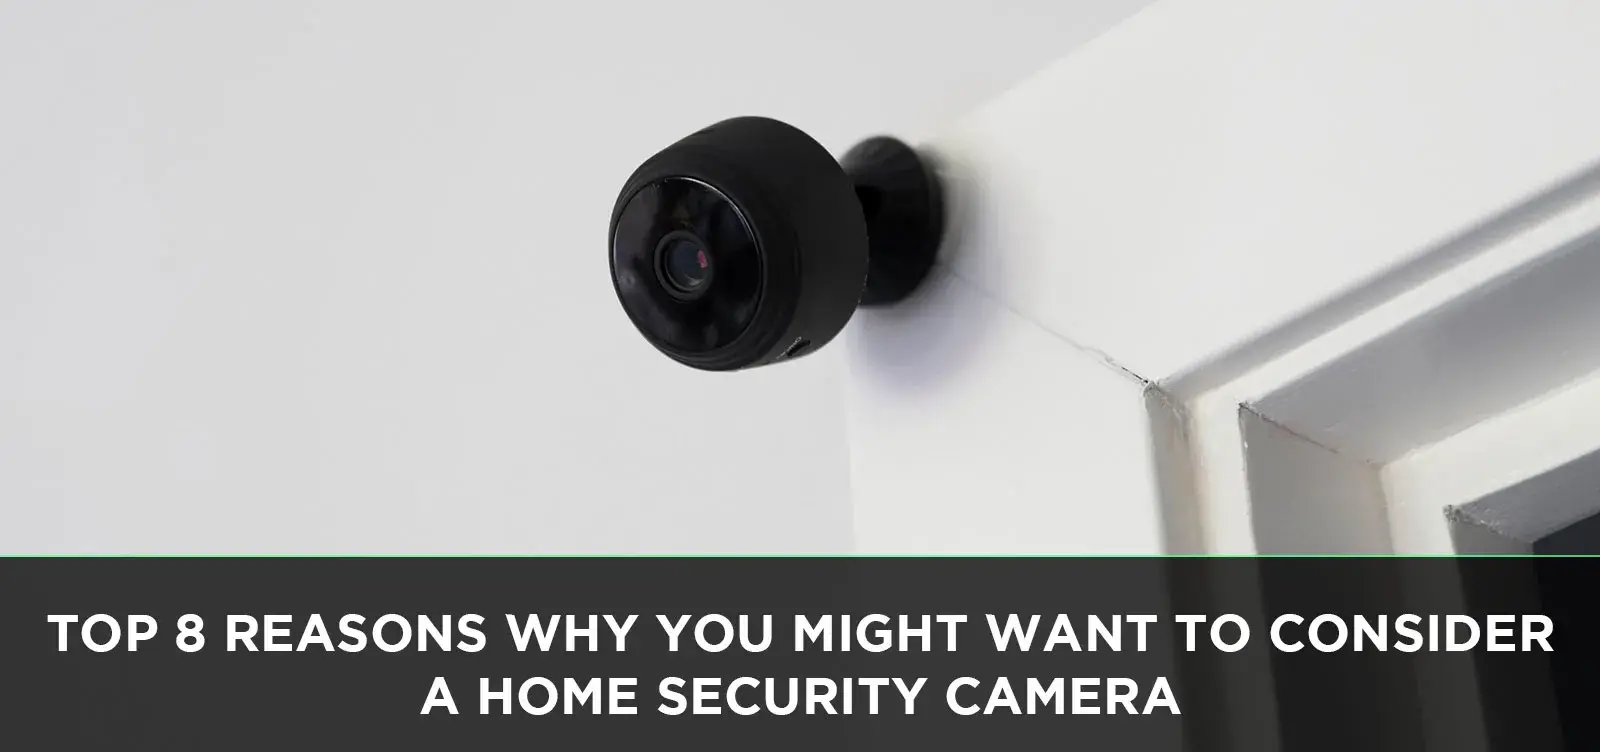 Top 8 Reasons Why You Might Want to Consider a Home Security Camera